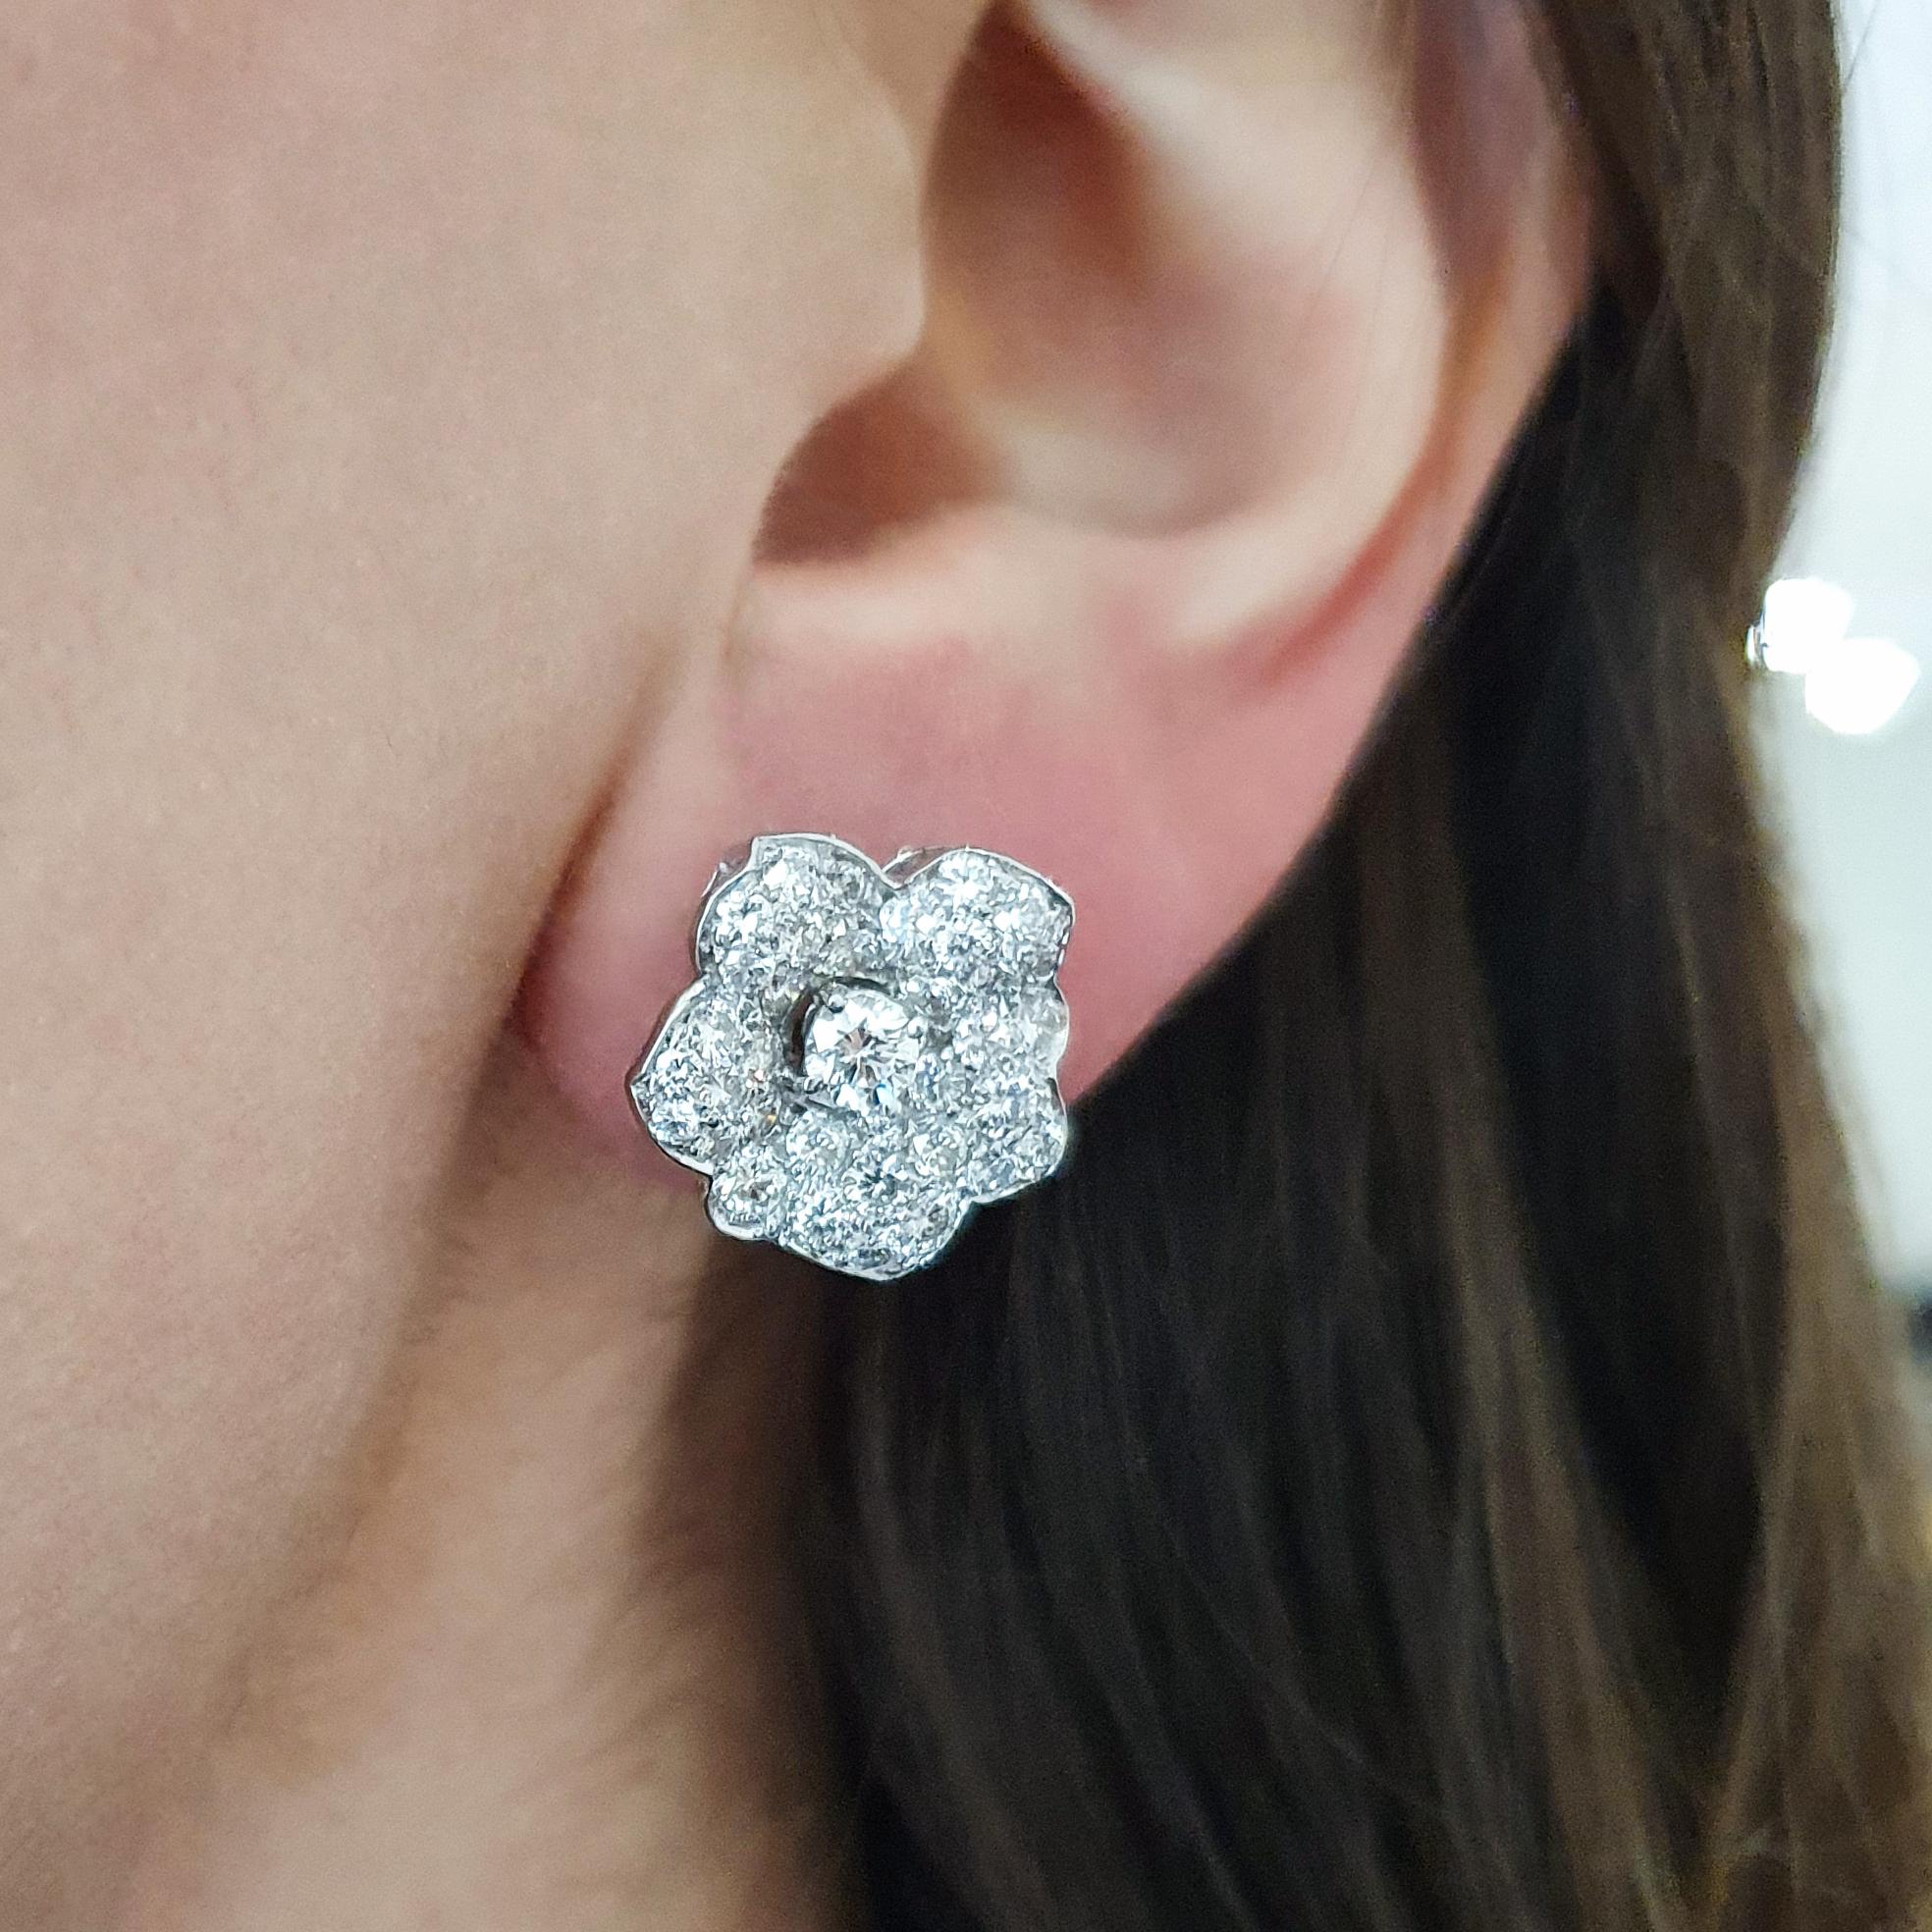 Diamond Flower white gold 18k Ear studs.

Diameter approximately 0.63 inch (1.60 centimeters).
Total weight: 6.61 grams

